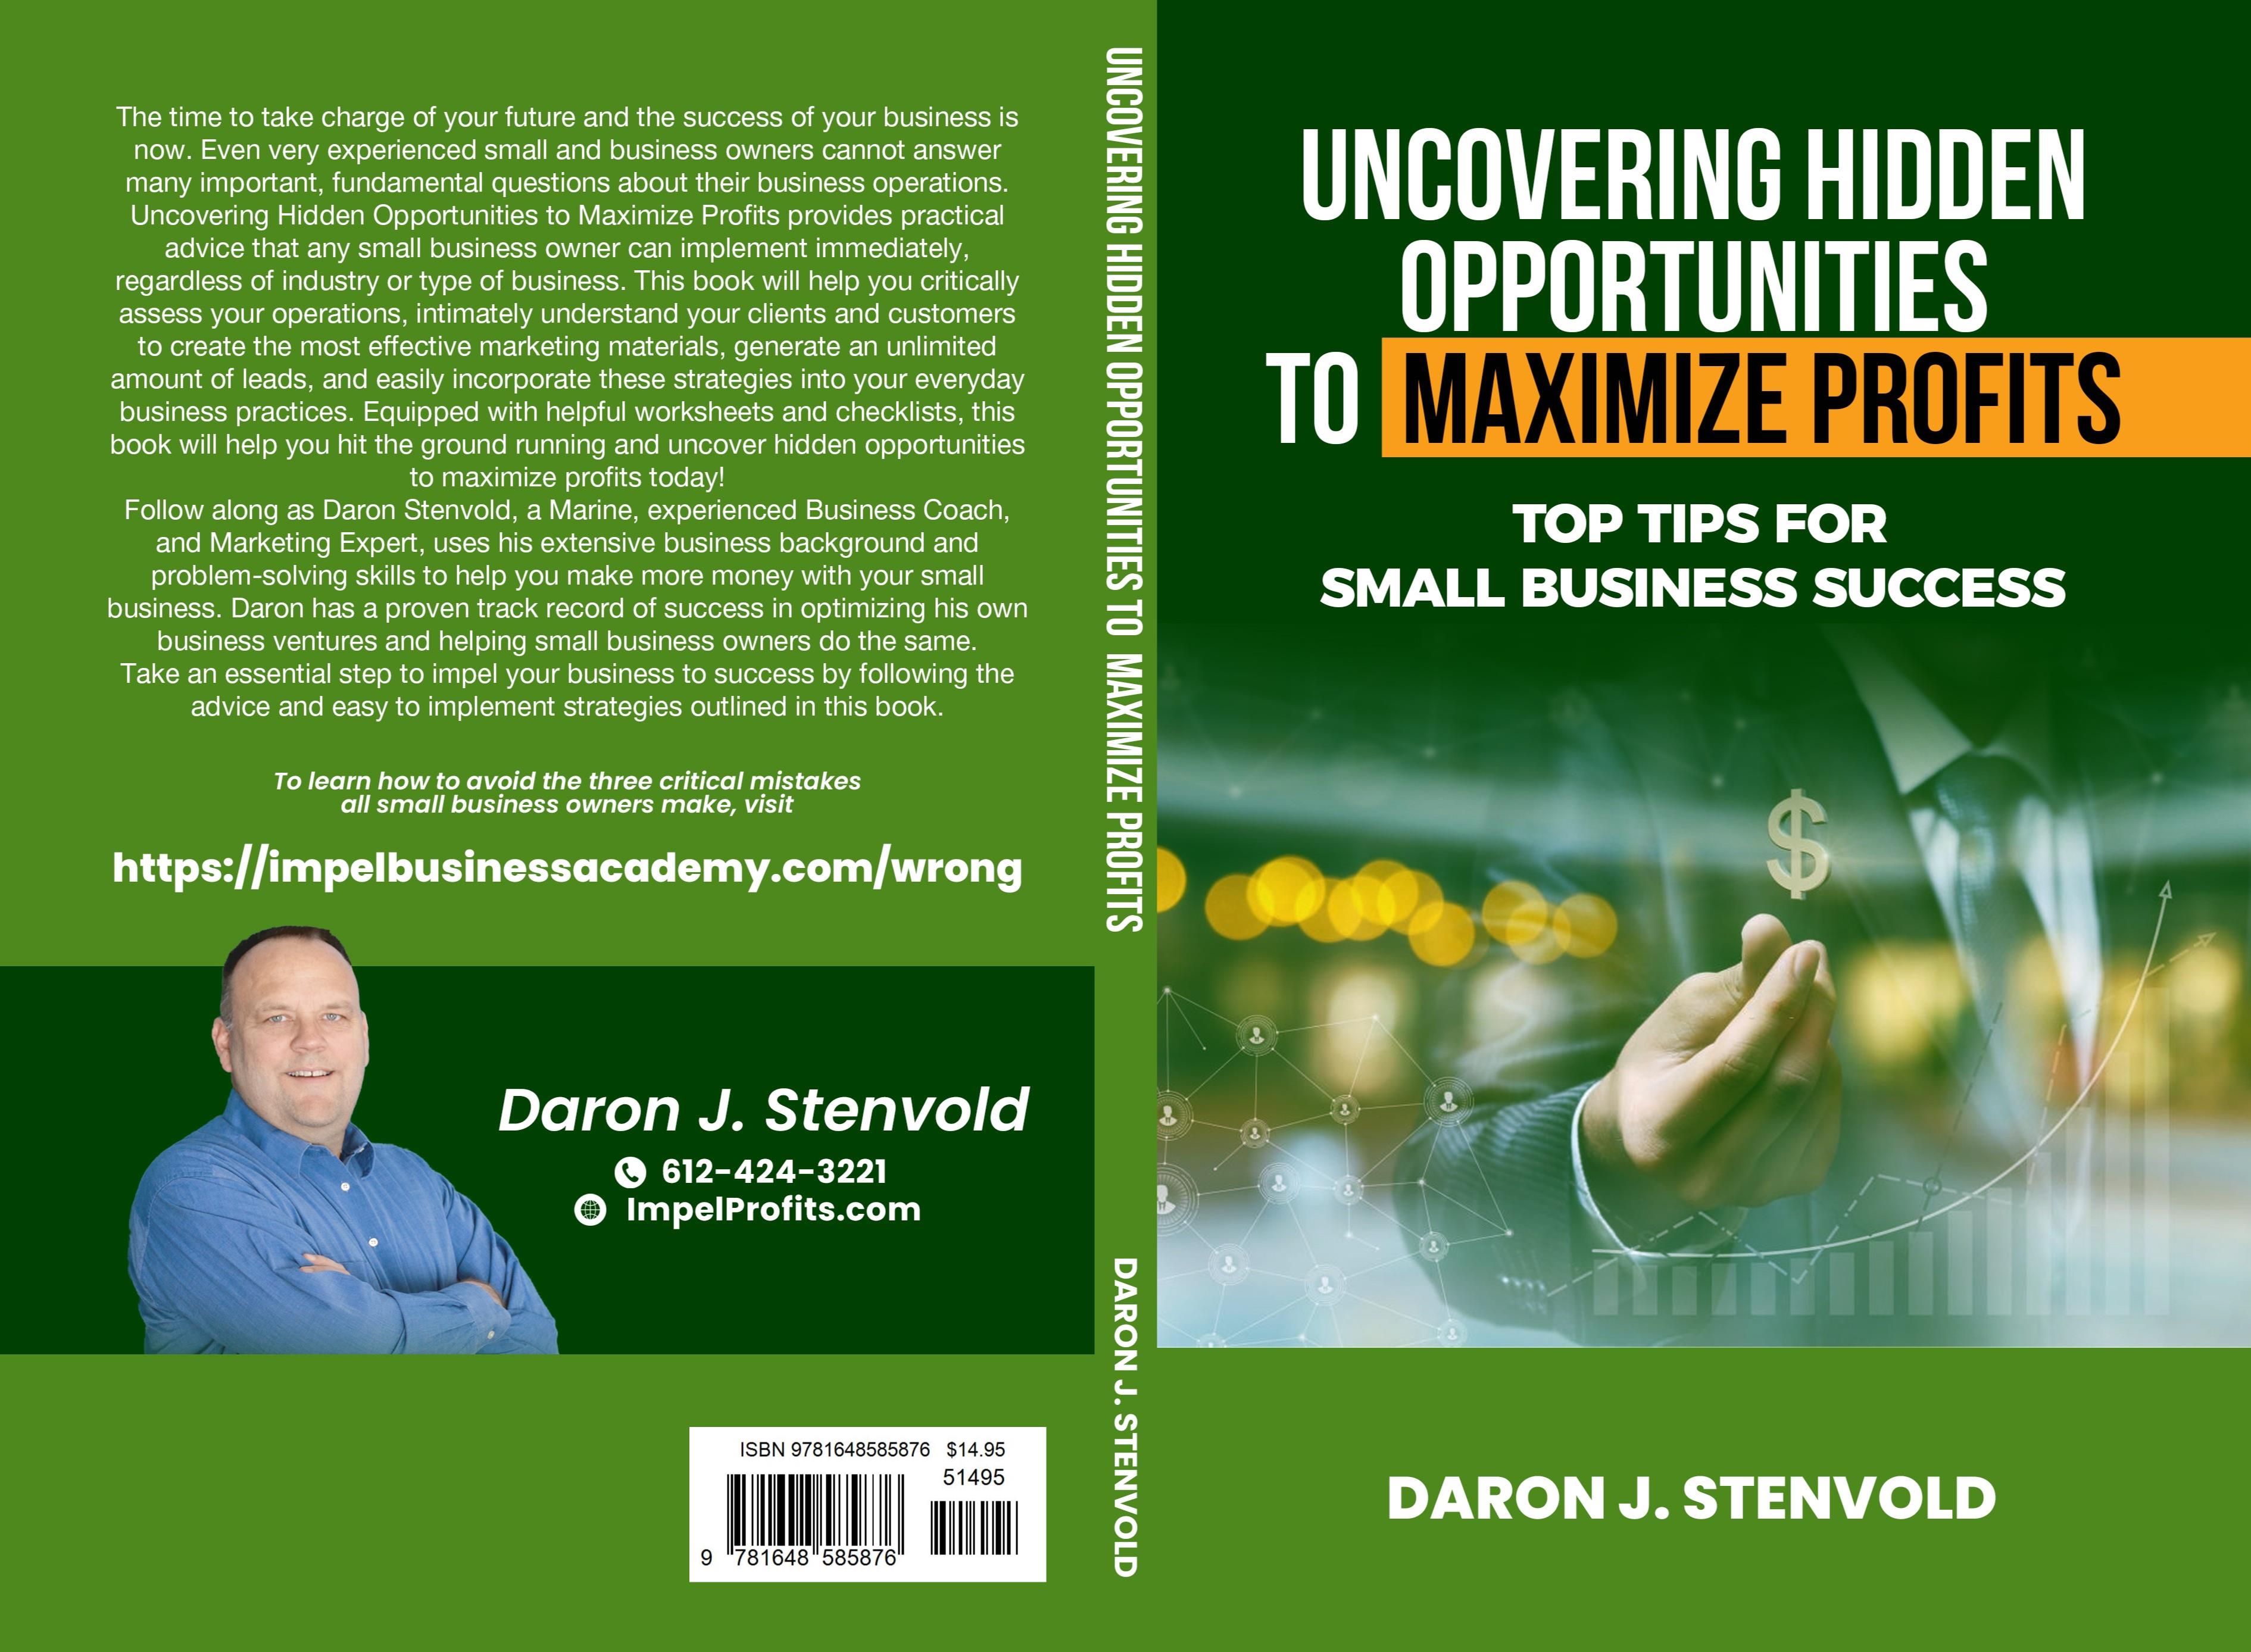 UNCOVERING HIDDEN OPPORTUNITIES TO MAXIMIZE PROFITS - Top Tips For Small Business Success cover image